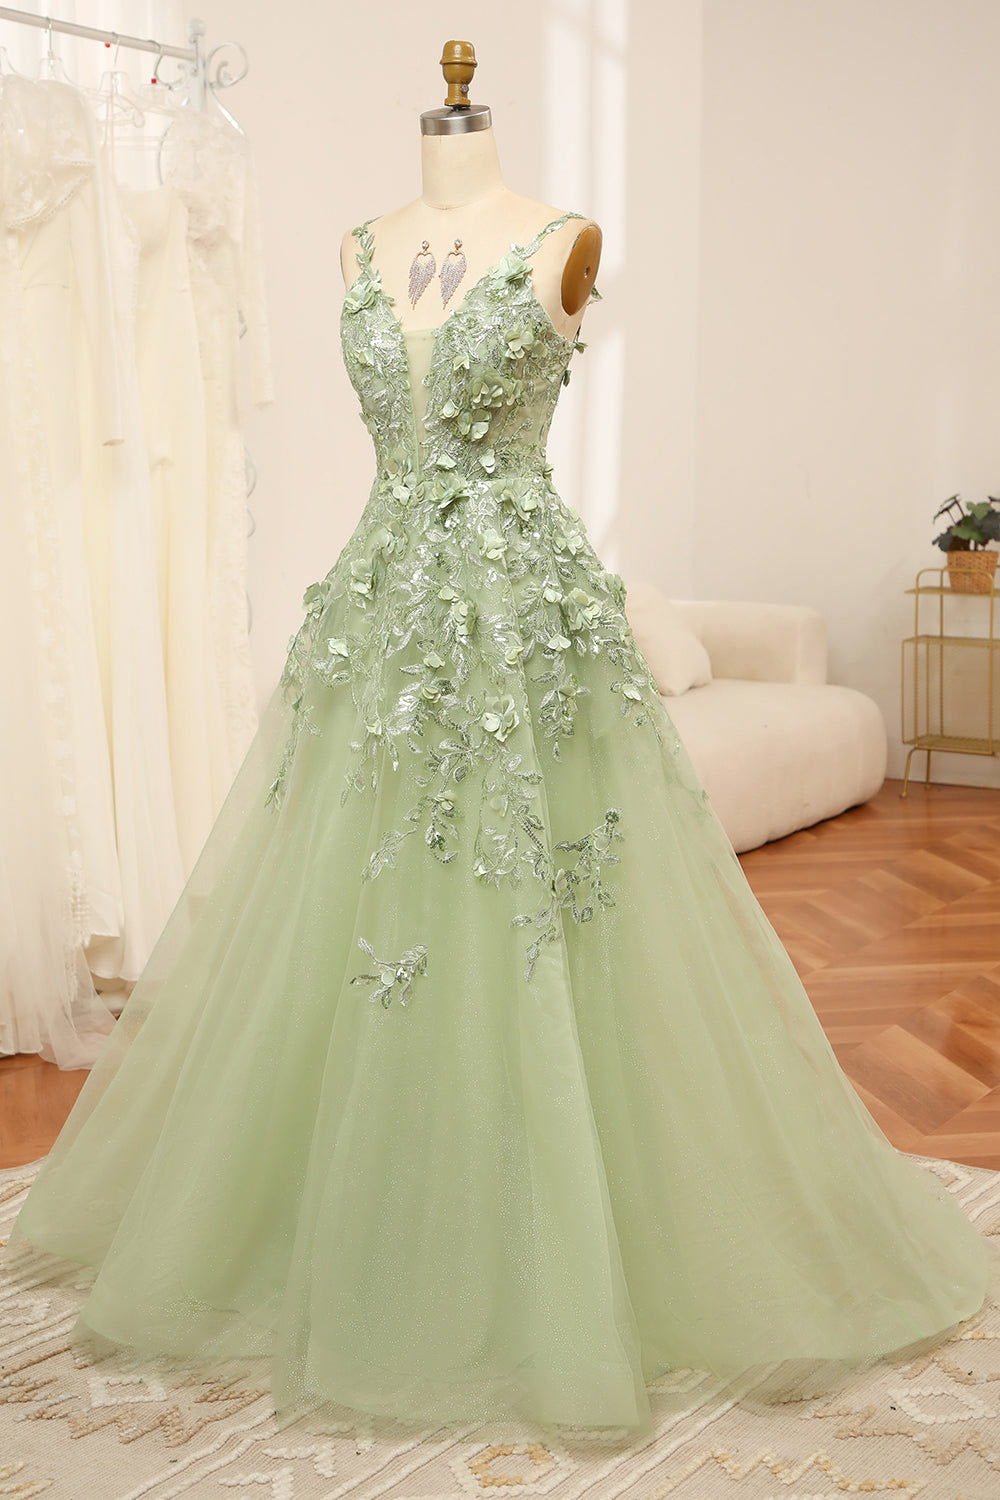 3D Embroidery floral lace party dress, green prom dress, custom fairy prom dress